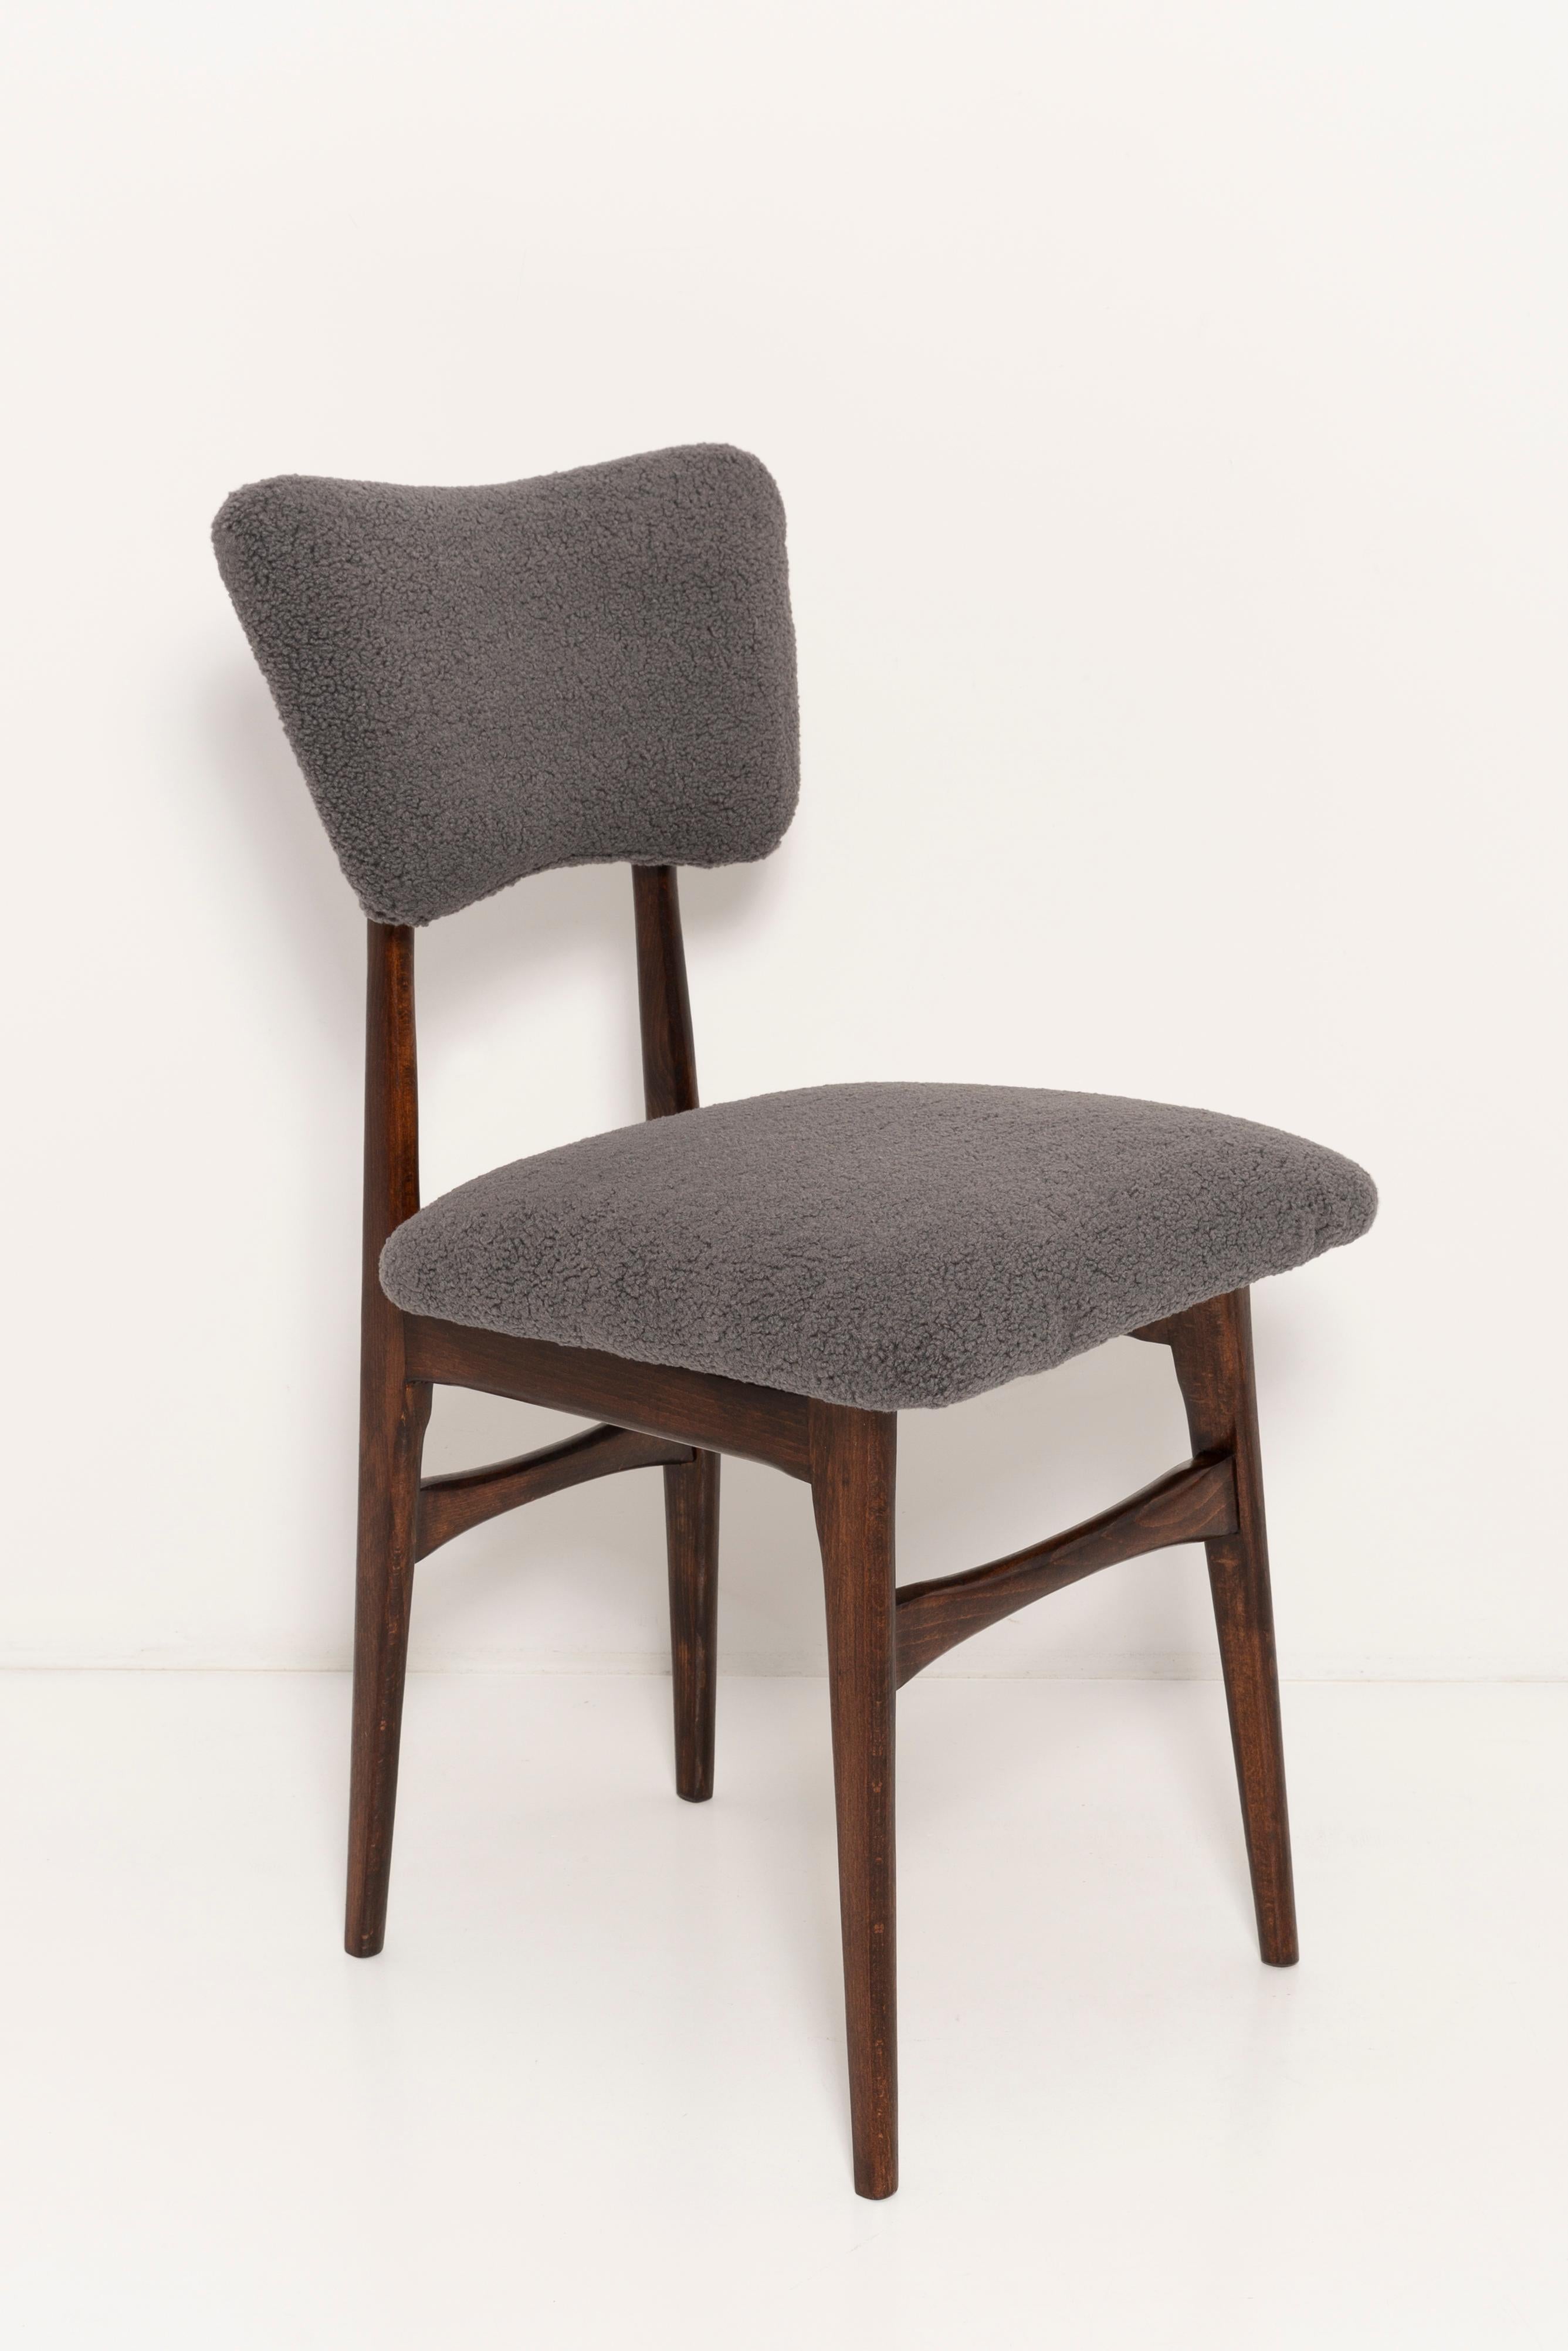 Chairs designed by Prof. Rajmund Halas. Made of beechwood. Chairs are after a complete upholstery renovation; the woodwork has been refreshed. Seat and back is dressed in dark gray (color 07), durable and pleasant to the touch bouclé fabric. Chairs